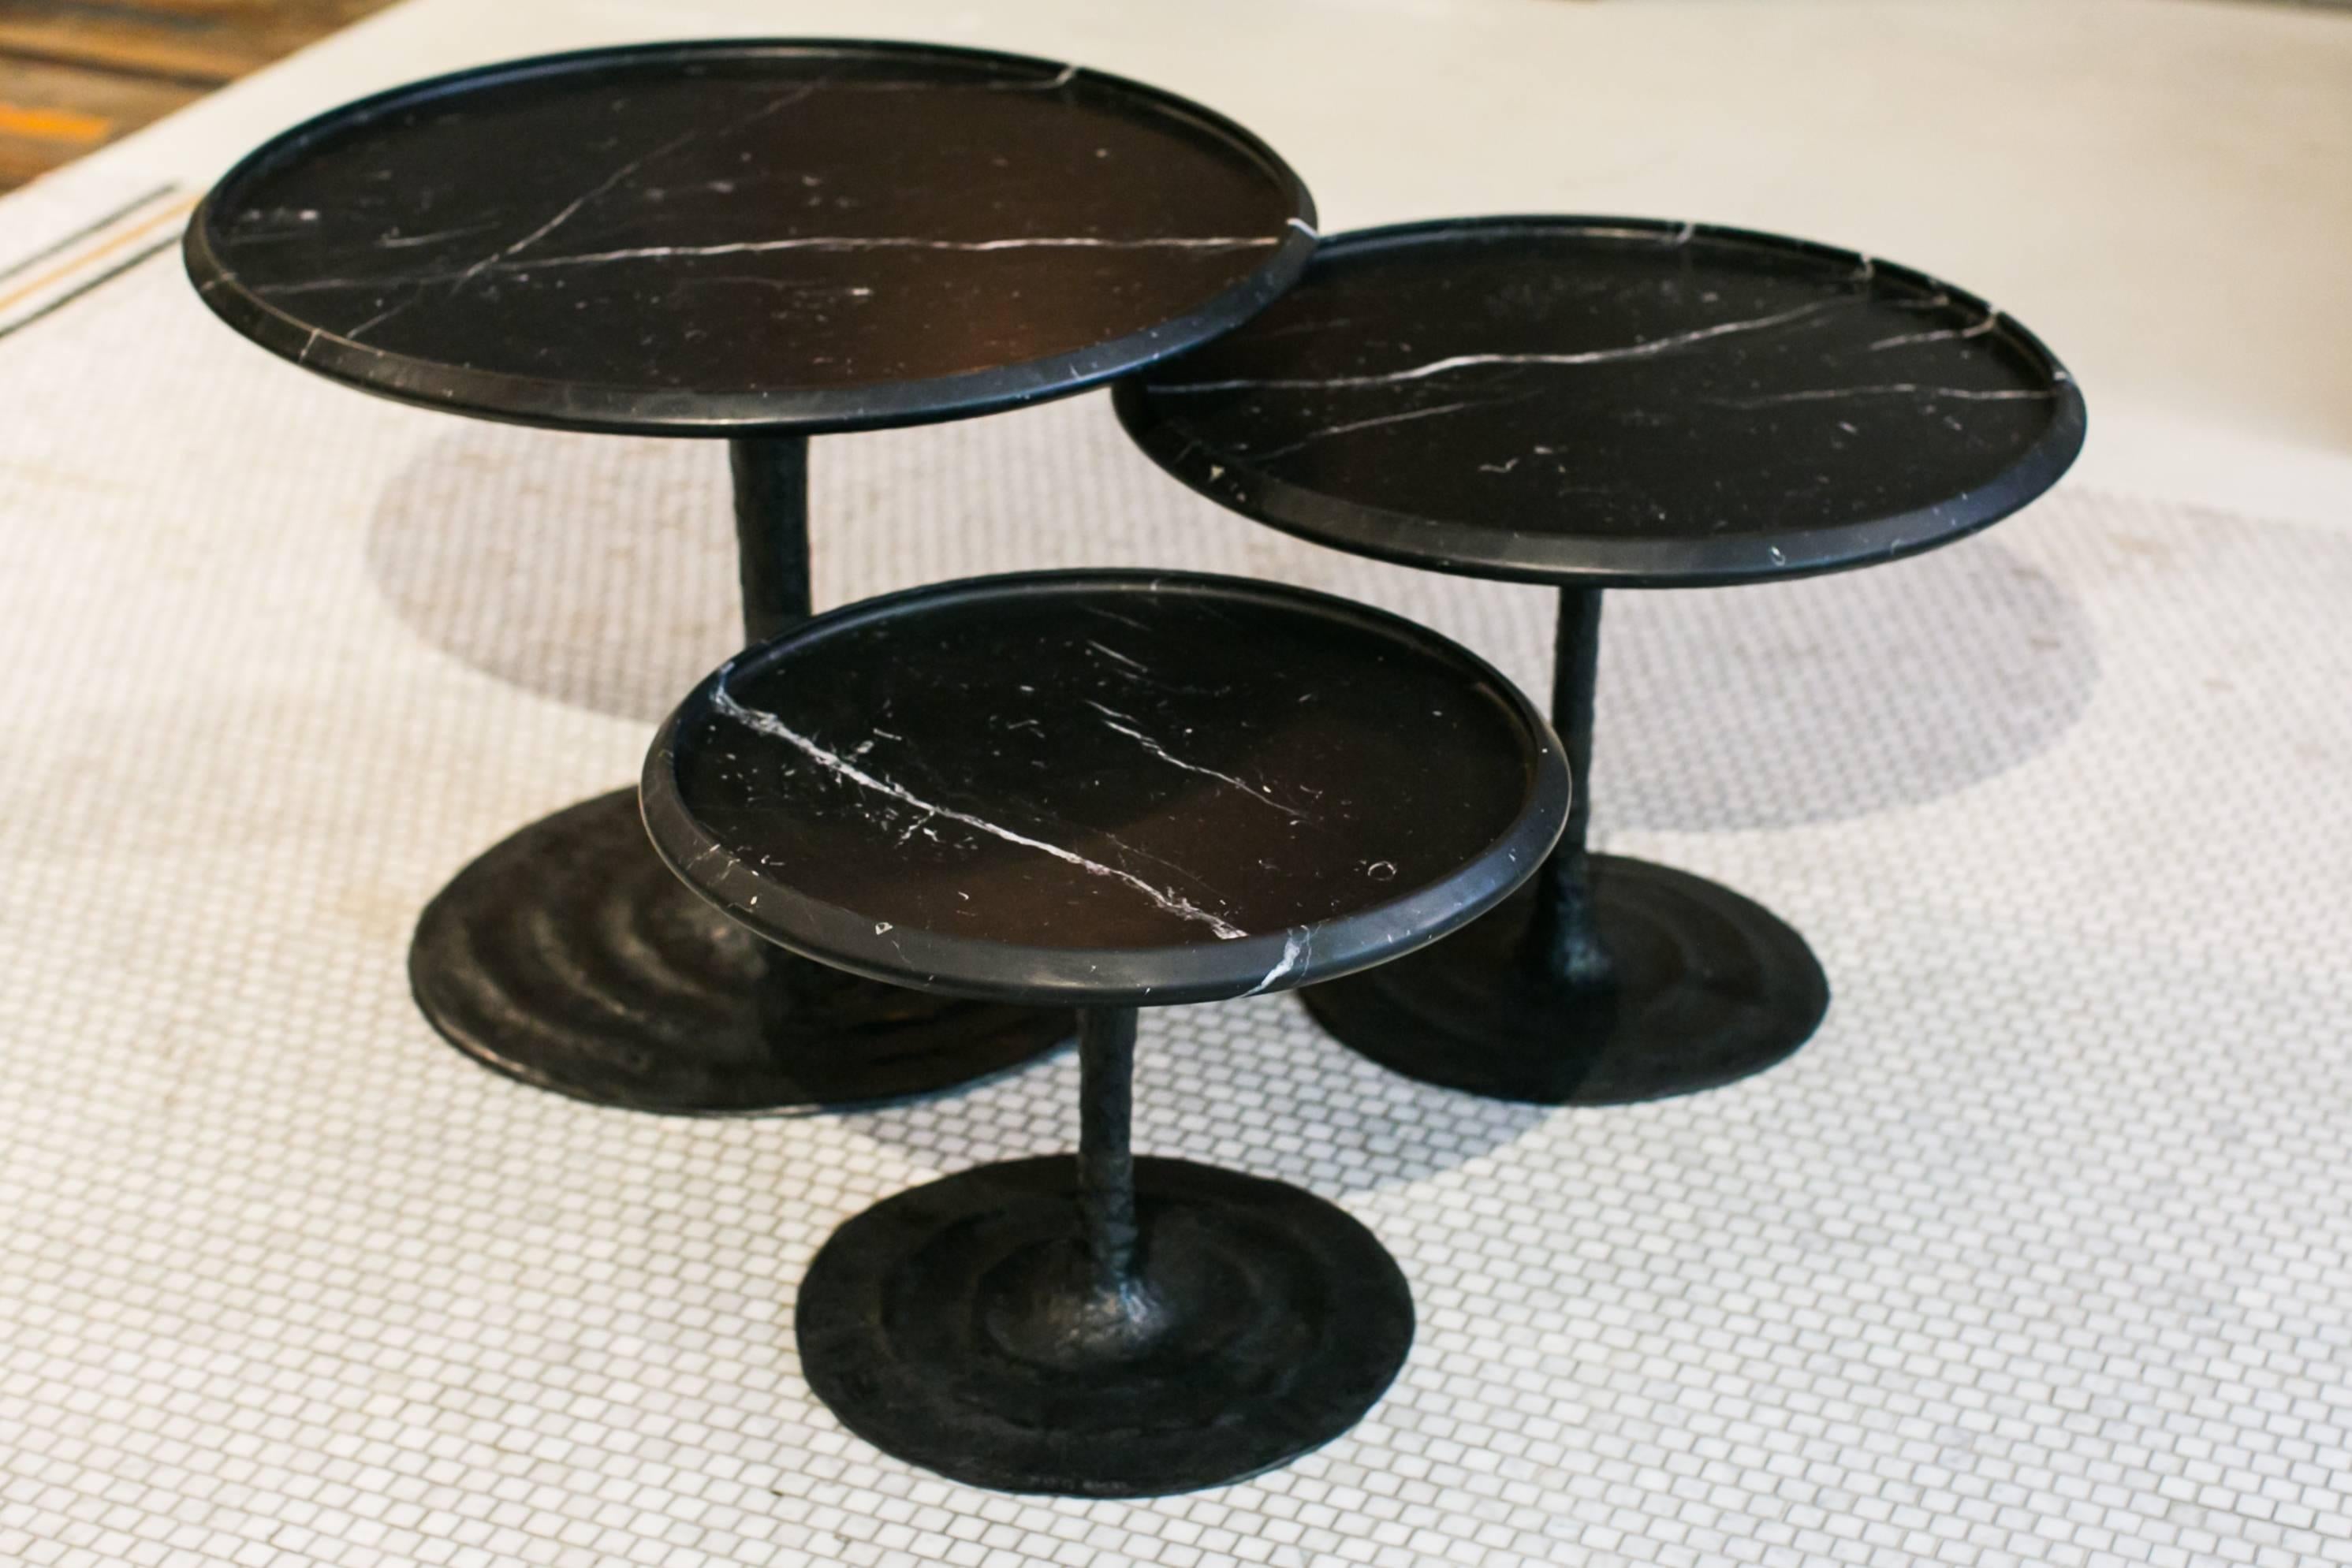 Limited edition, signed and numbered, the Giverny tables is a series of nesting coffee tables inspired by the nénuphars (waterlilies) of Monet's house in Giverny. The movement carved at the bronze foot evoke the water movement. Their elegant